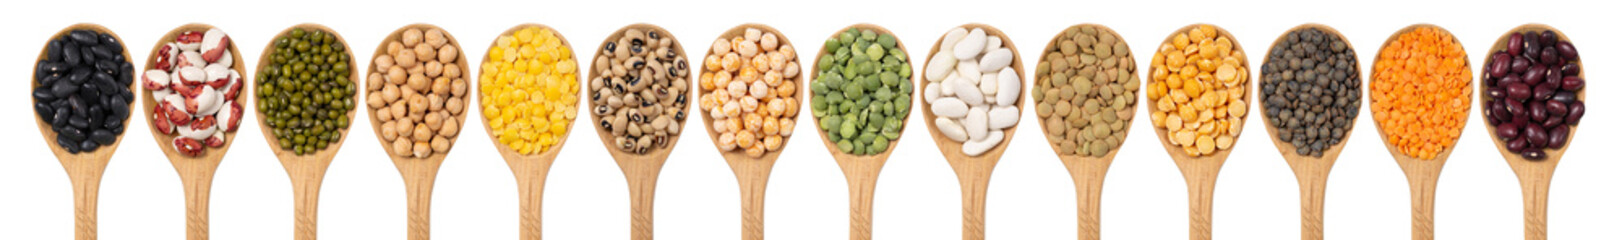 Collection of legumes in wooden spoons on a white background top view. An isolated set of beans, lentils, peas, mung bean, chickpeas.